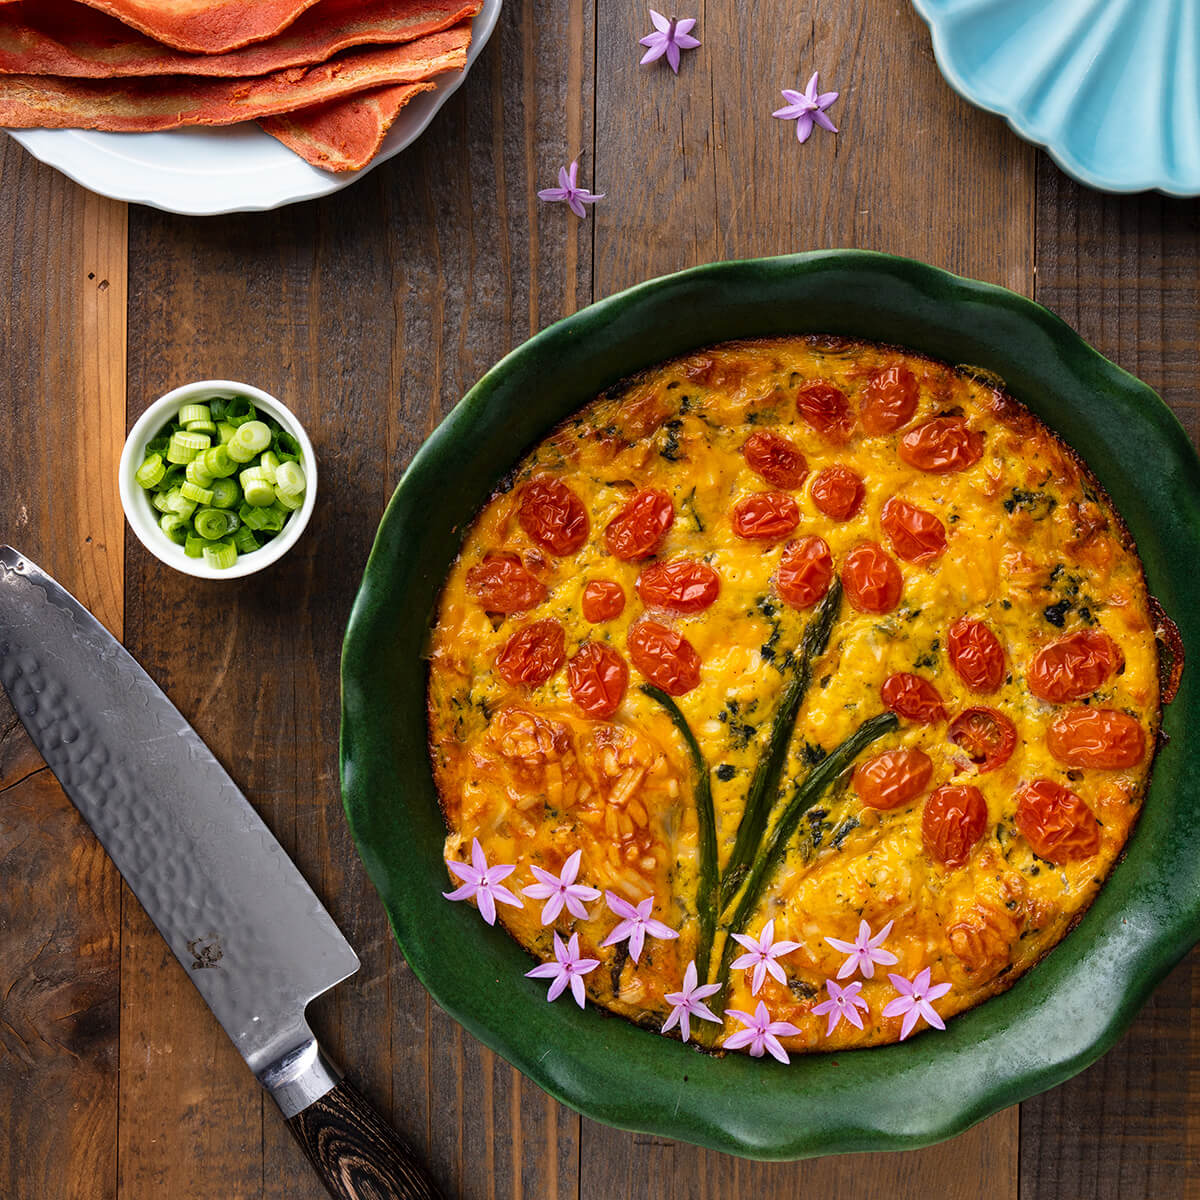 vegan gluten-free quiche made with Just Egg and decorated with tomatoes and asparagus